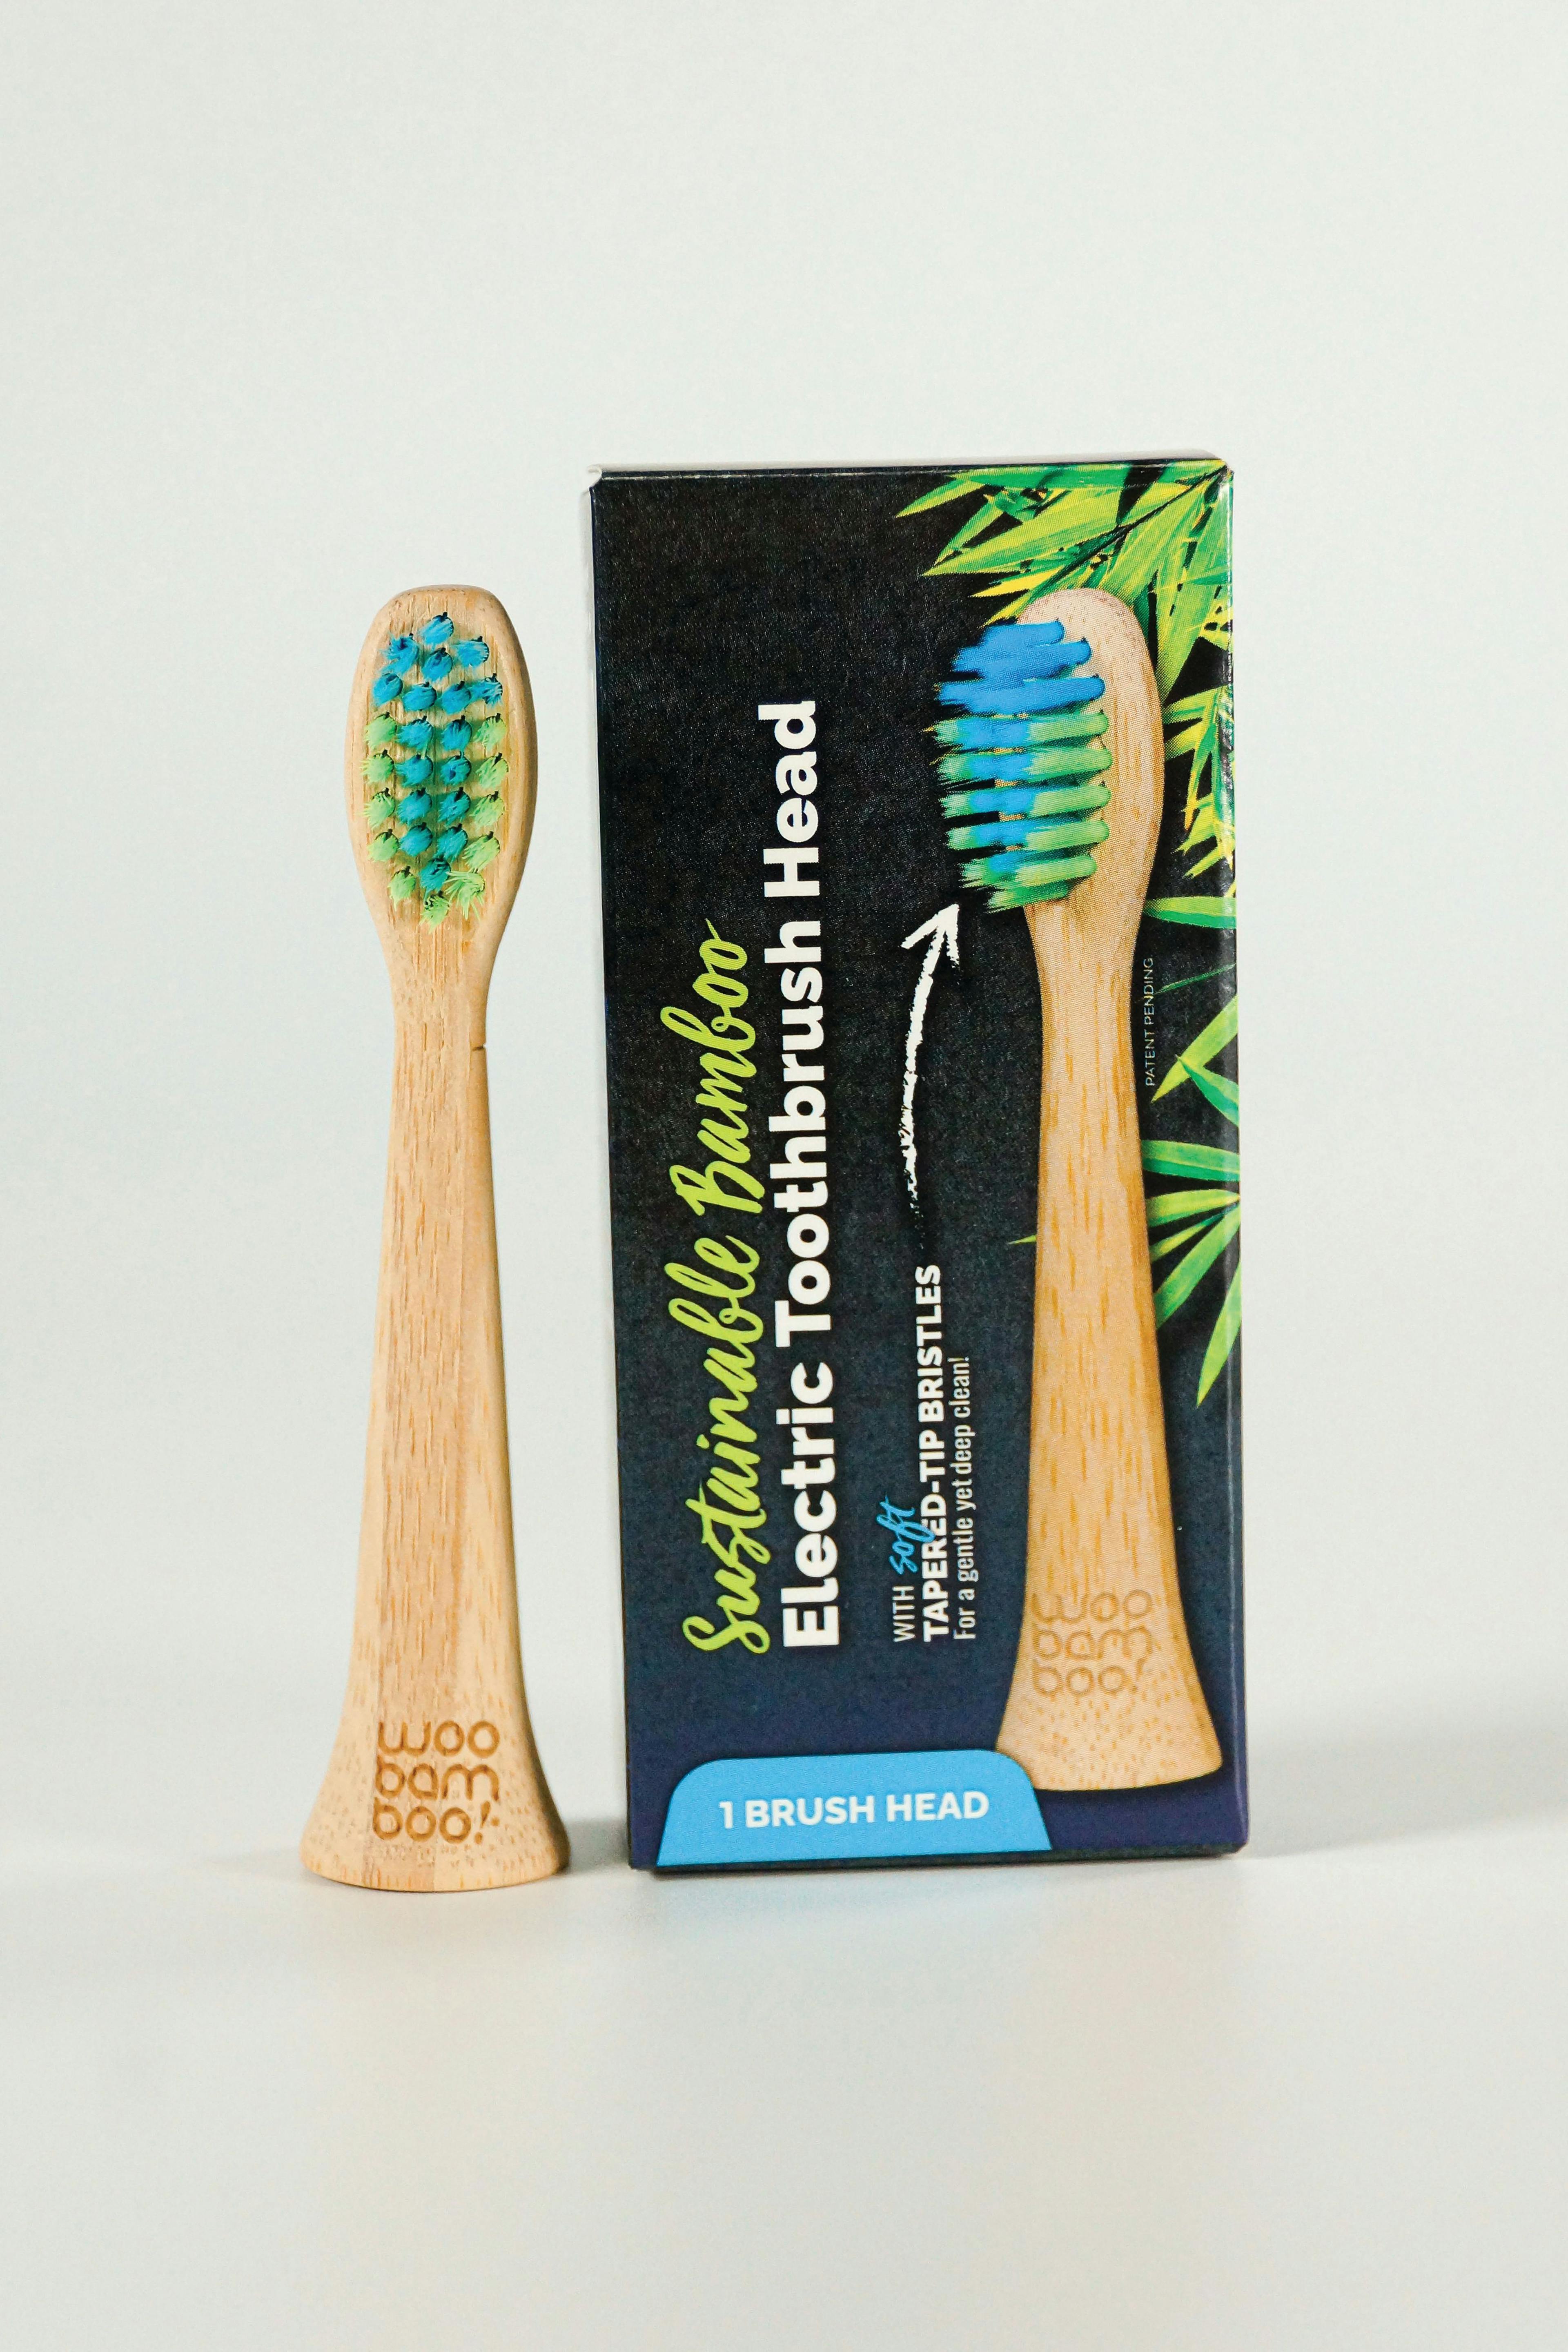 WooBamboo Brushhead replacement